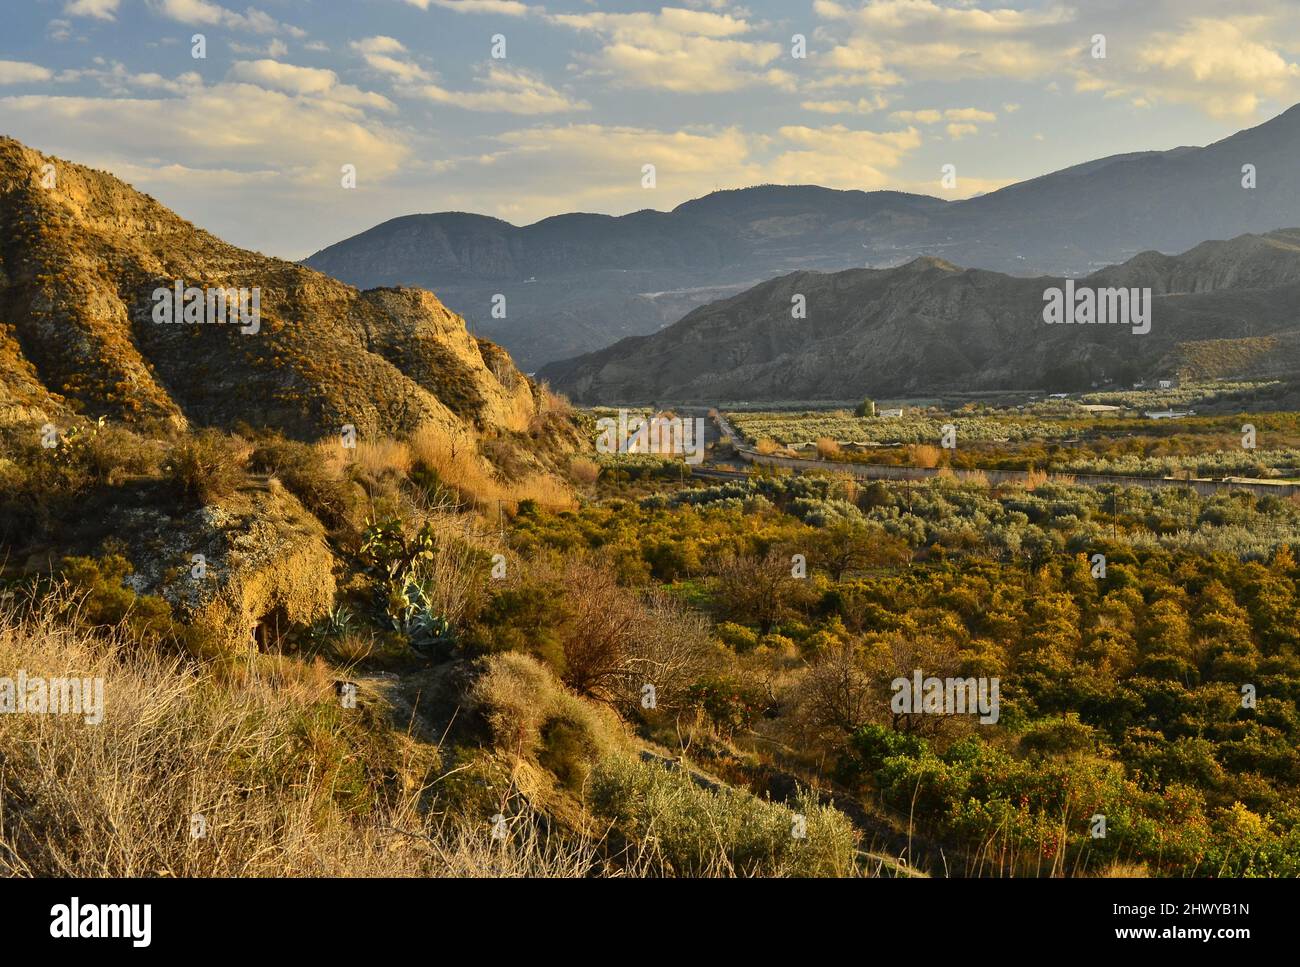 Rio Andarax dry riverbed with agricultural crops, mainly olive and citrus trees, arid slopes of Sierra de Gador mountains in Almeria southern Spain. Stock Photo